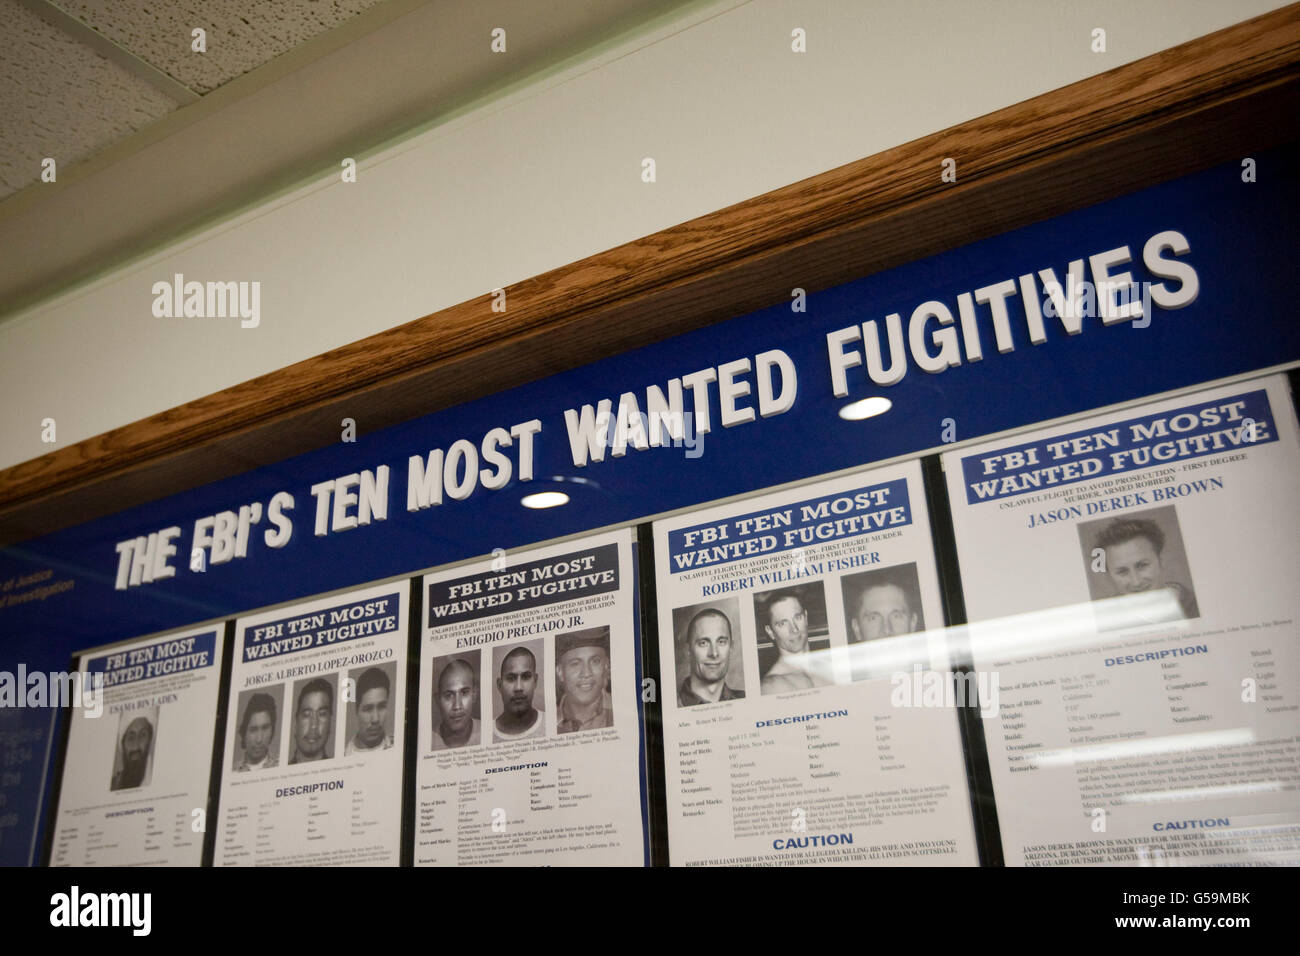 View of a display listing the FBI's 10 most wanted fugitives on a wall at the FBI National Academy in Quantico, VA, USA, 2009 Stock Photo